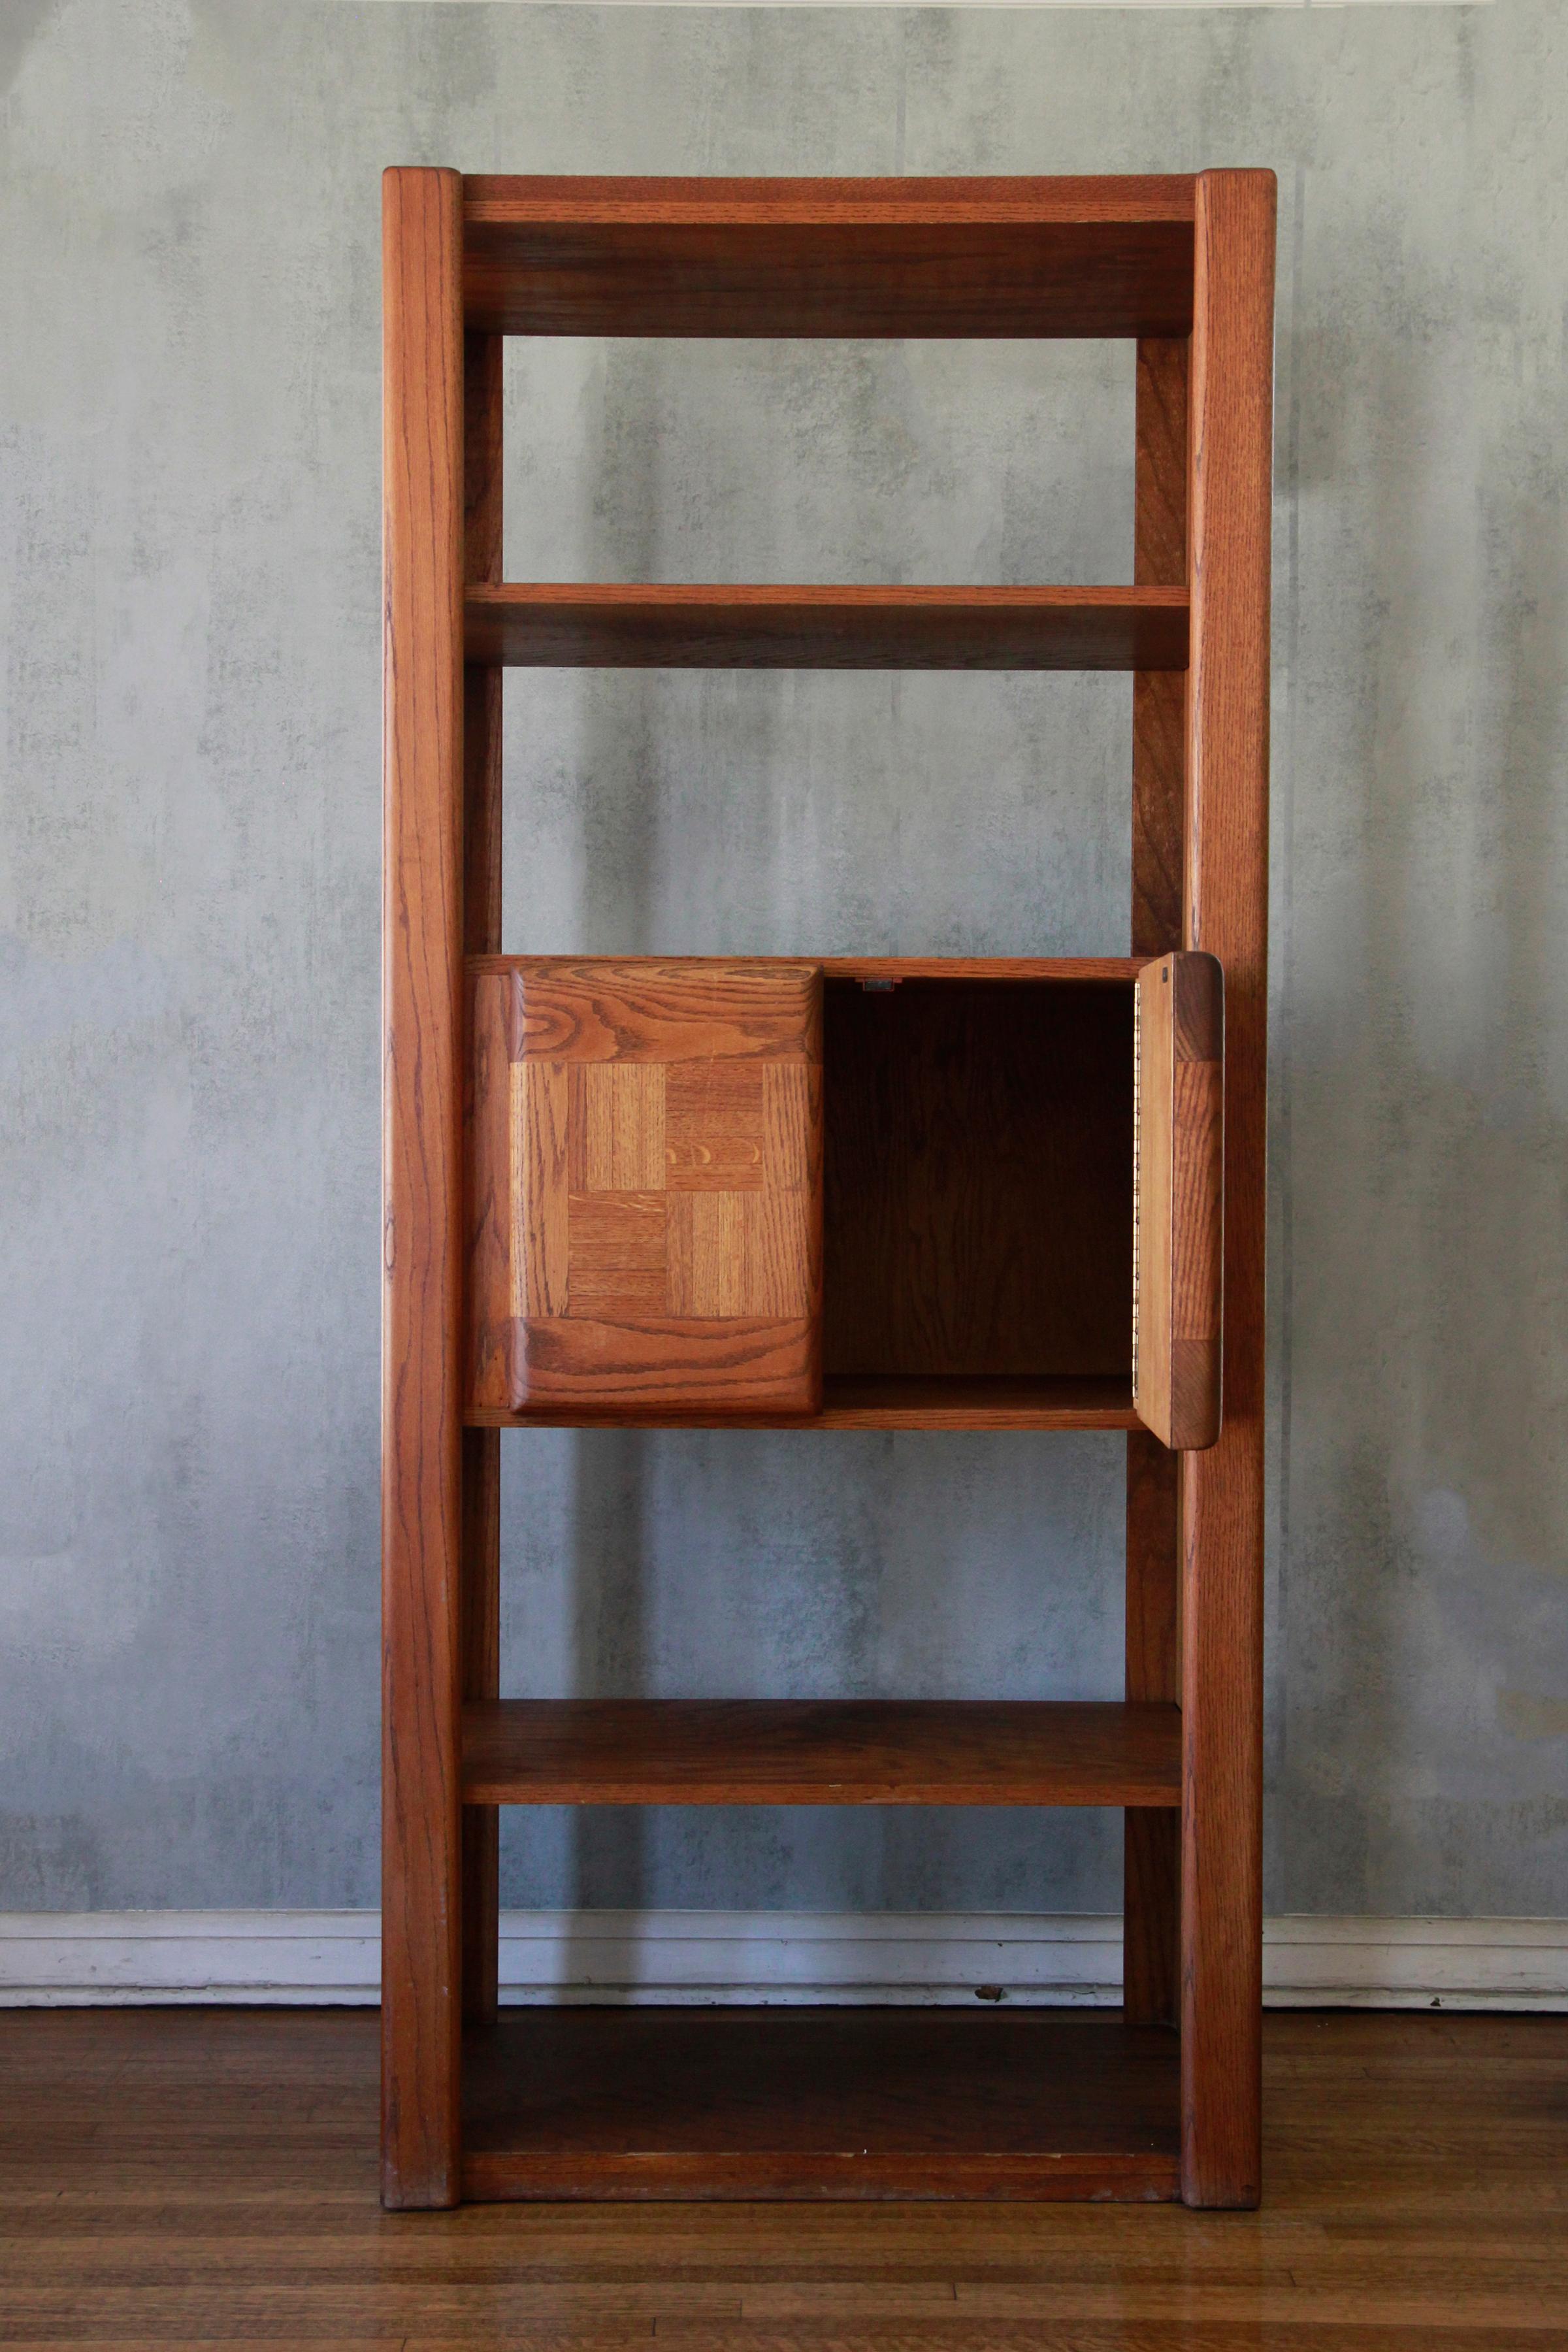 Bookcase by Lou Hodges, designed and produced in California in the 1970s through early 1980s. Lou Hodges has become such a collectible designer in the past decade, as 1970s California Modern design has surged in demand and value.